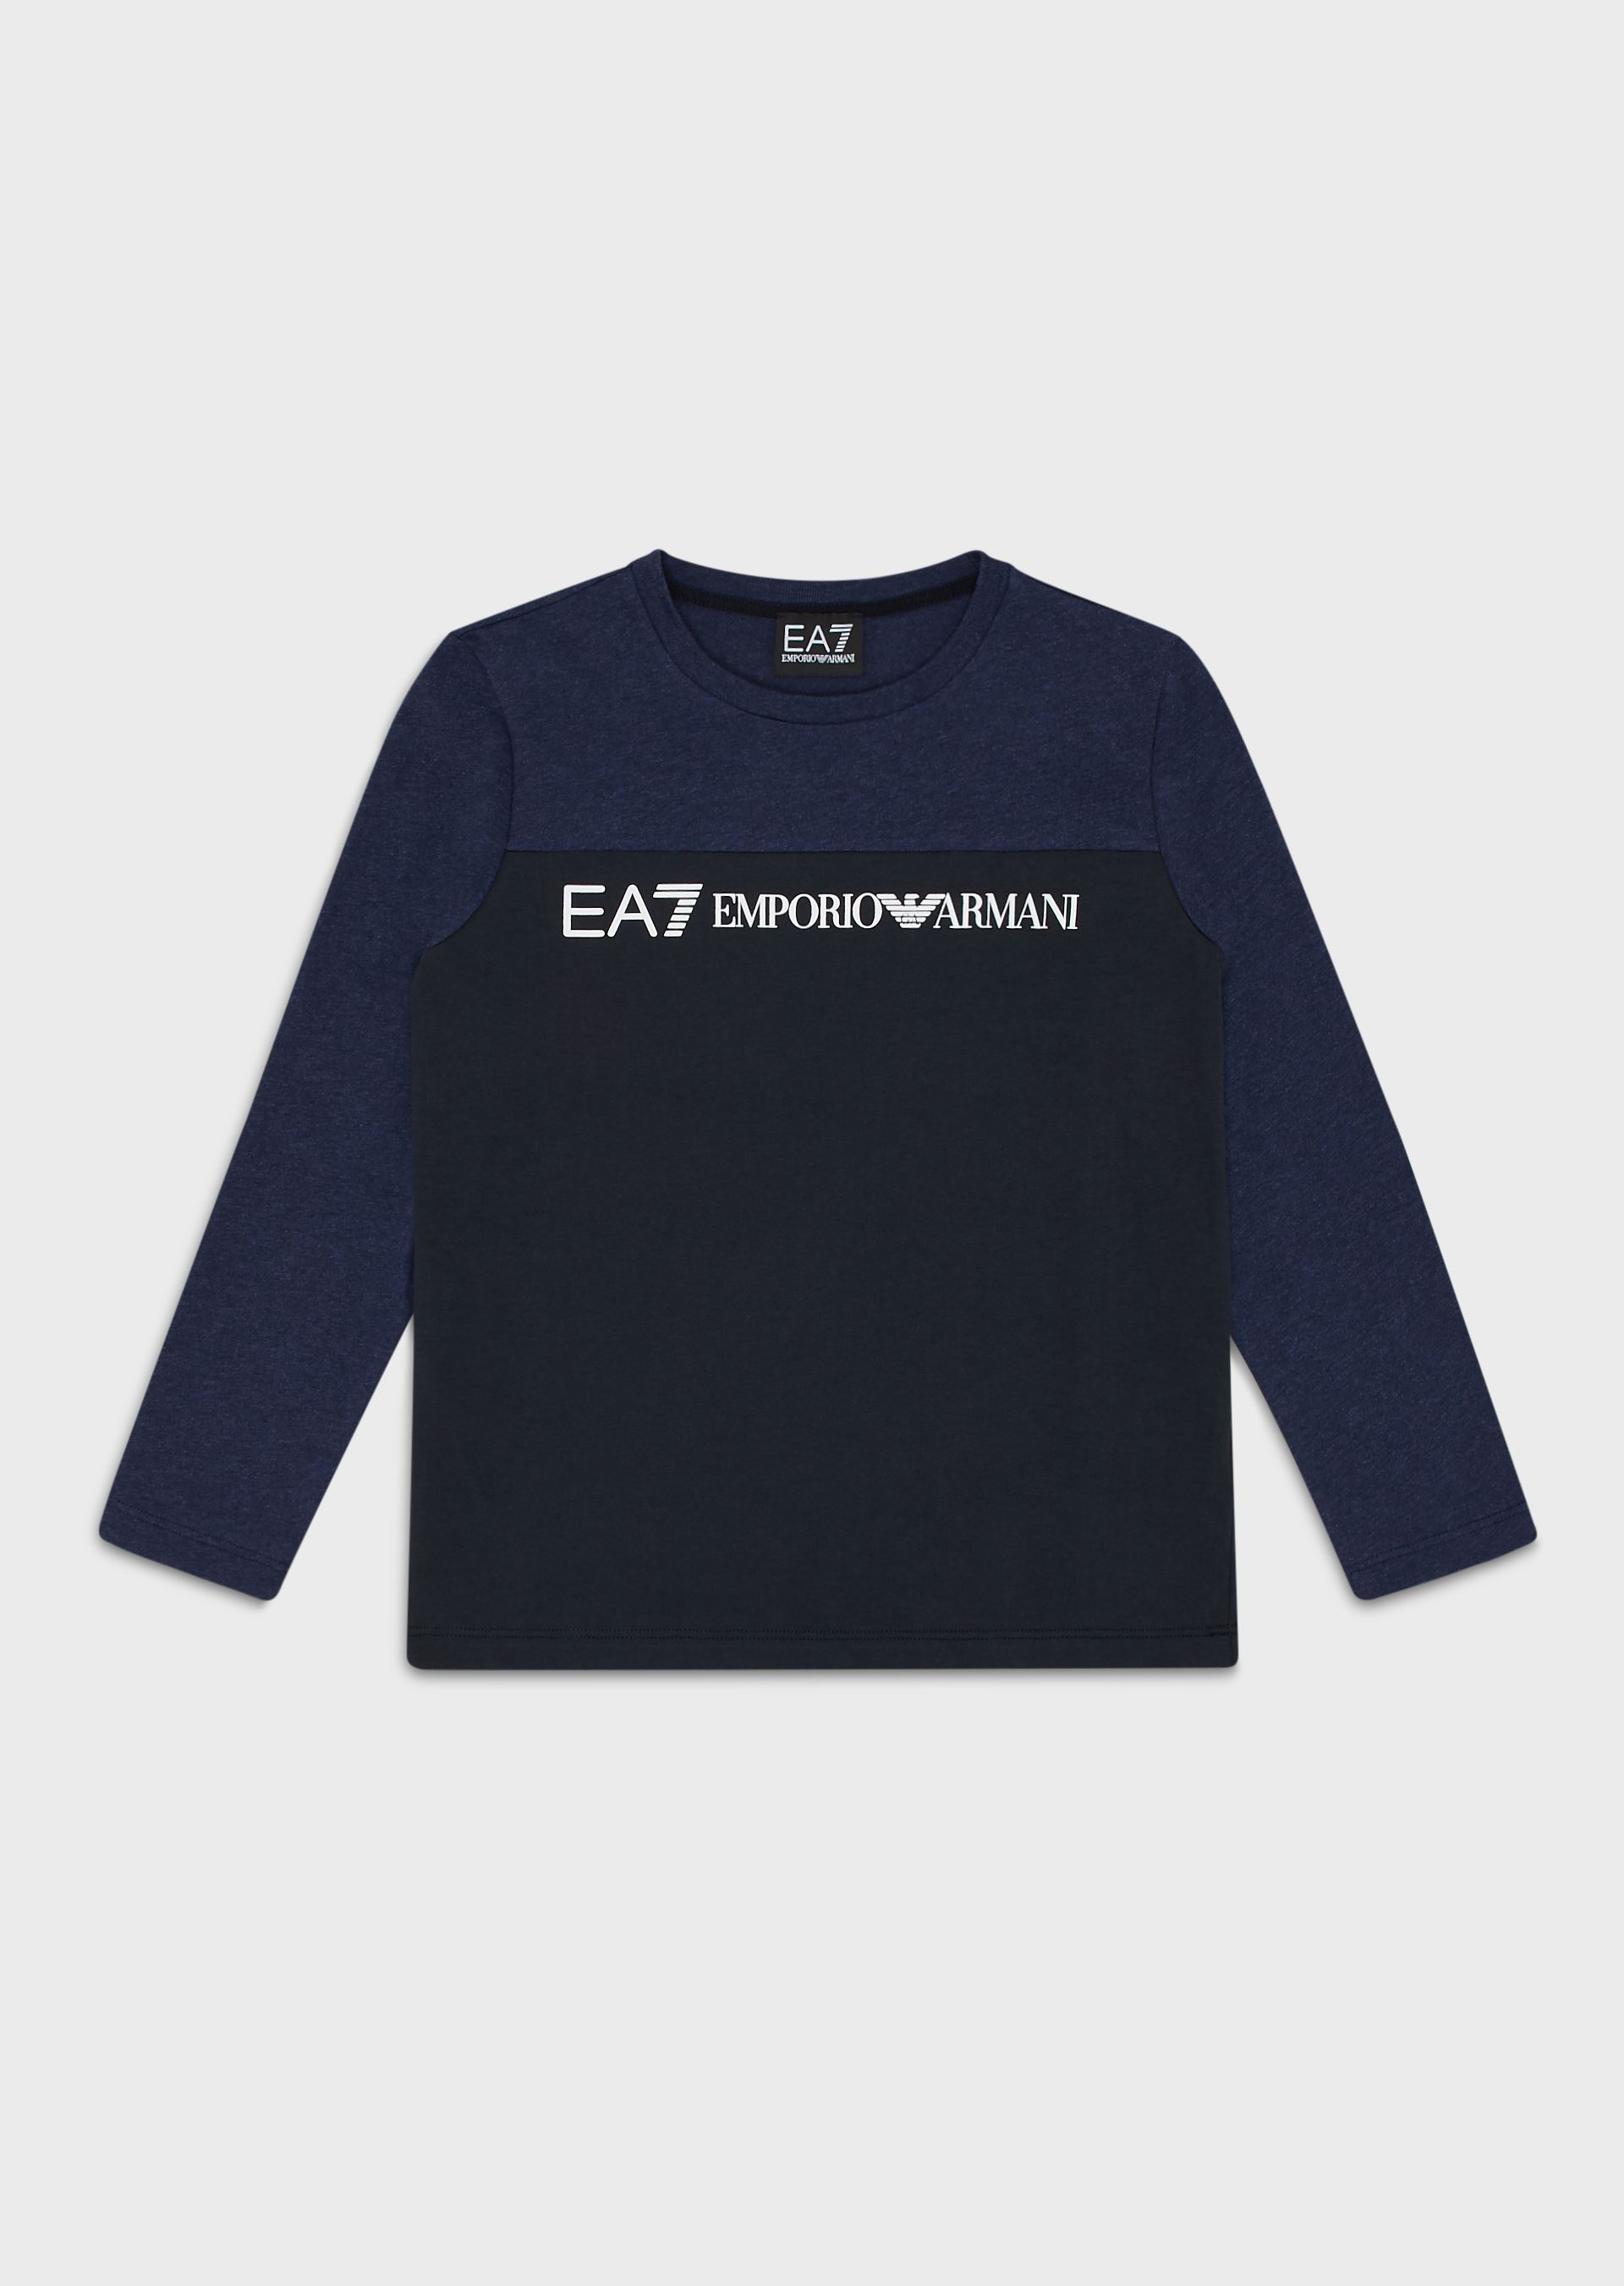 Emporio Armani Long-sleeved T-shirts - Item 12511383 In Blue